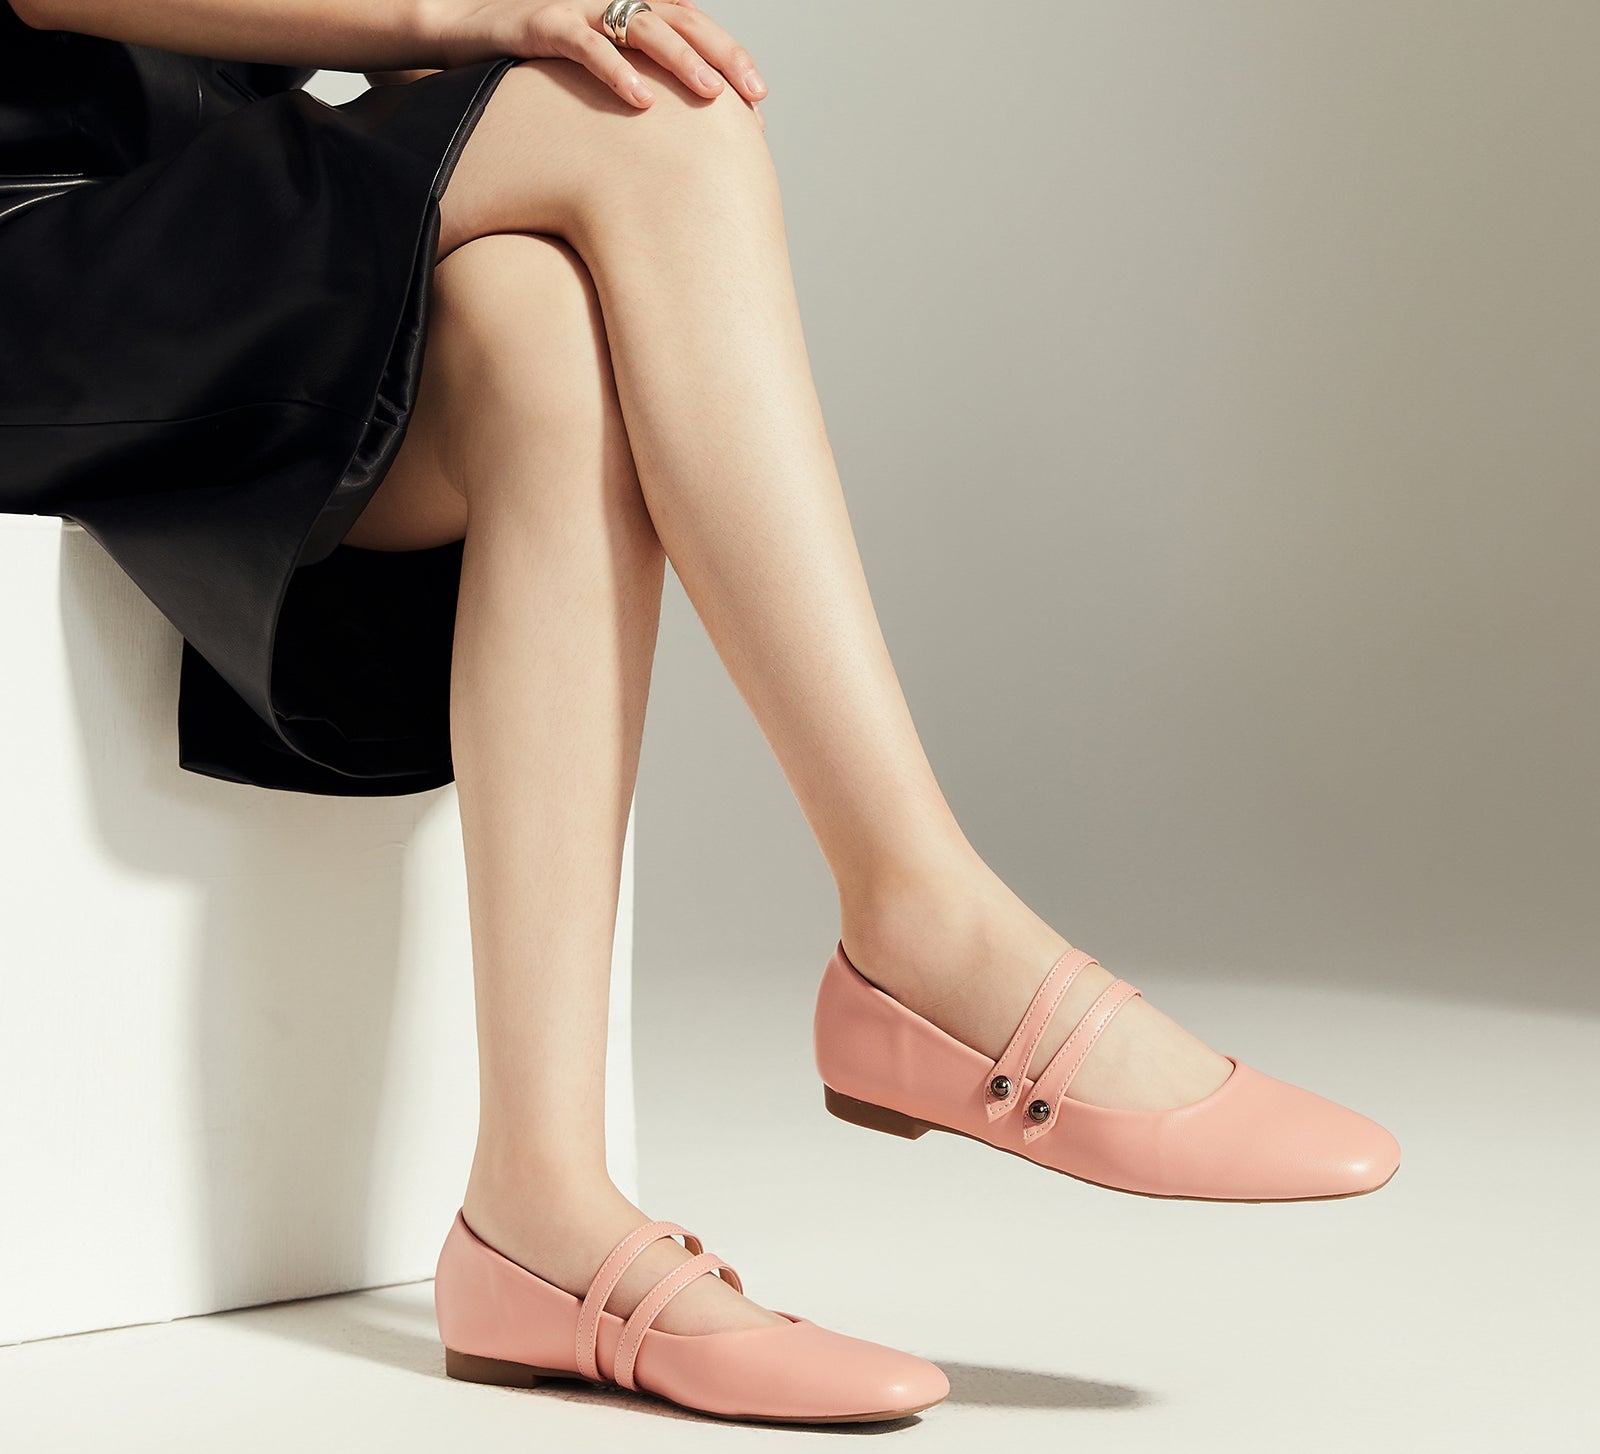 Pink Double Stripes Mary Janes, perfect for adding a touch of soft and romantic allure to your style